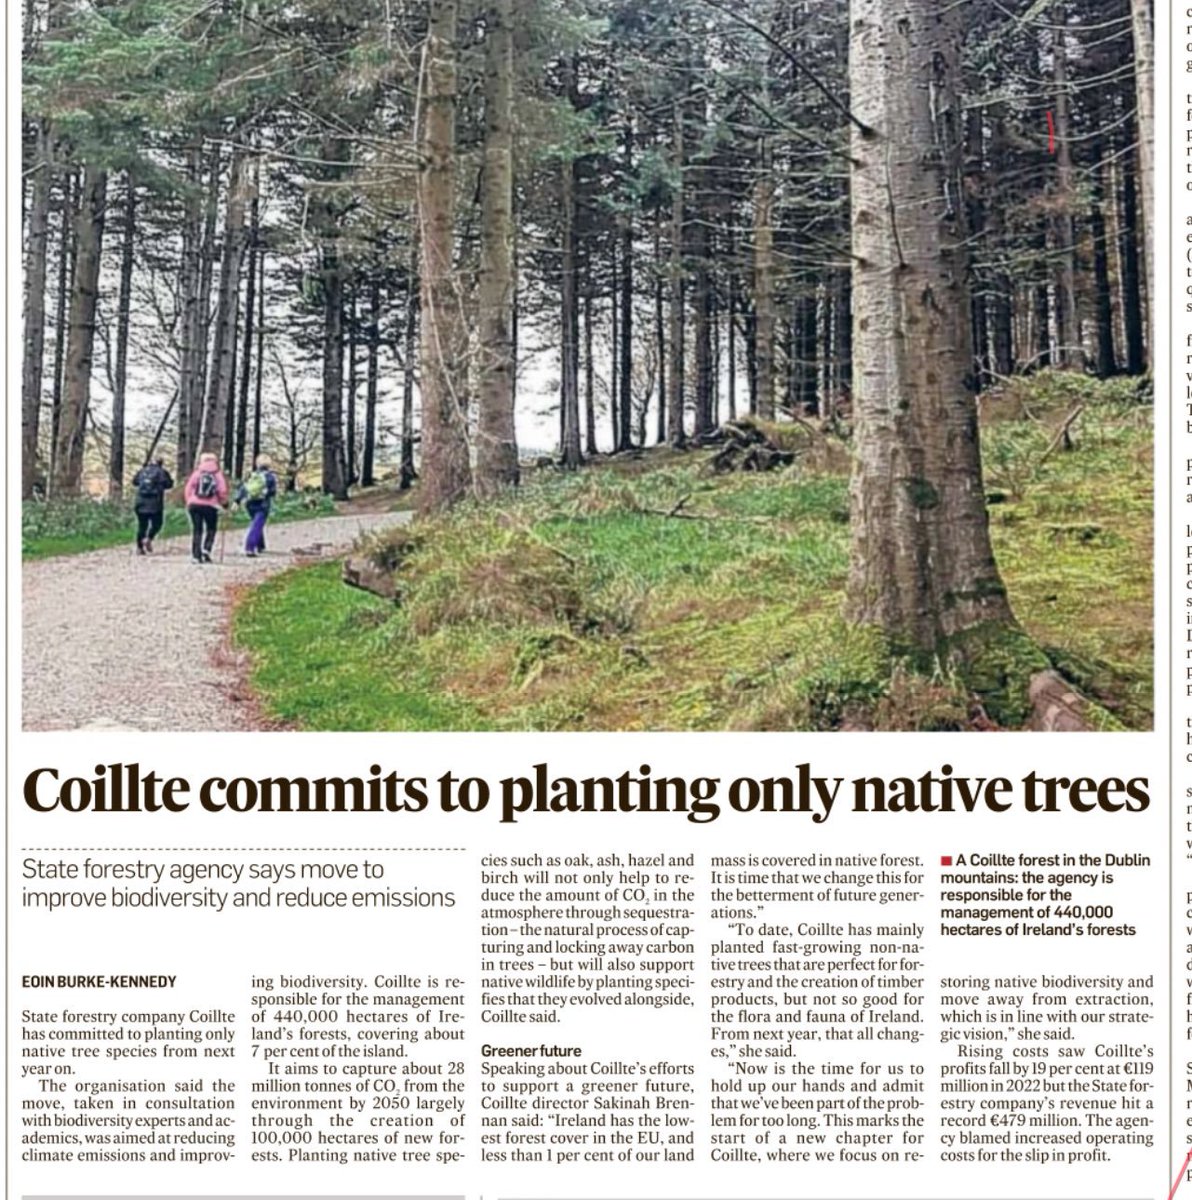 'Now it's time for us to hold up our hands and admit that we've been part of the problem for too long'. So honest @coilltenews had it scrubbed from @IrishTimes website 🙈